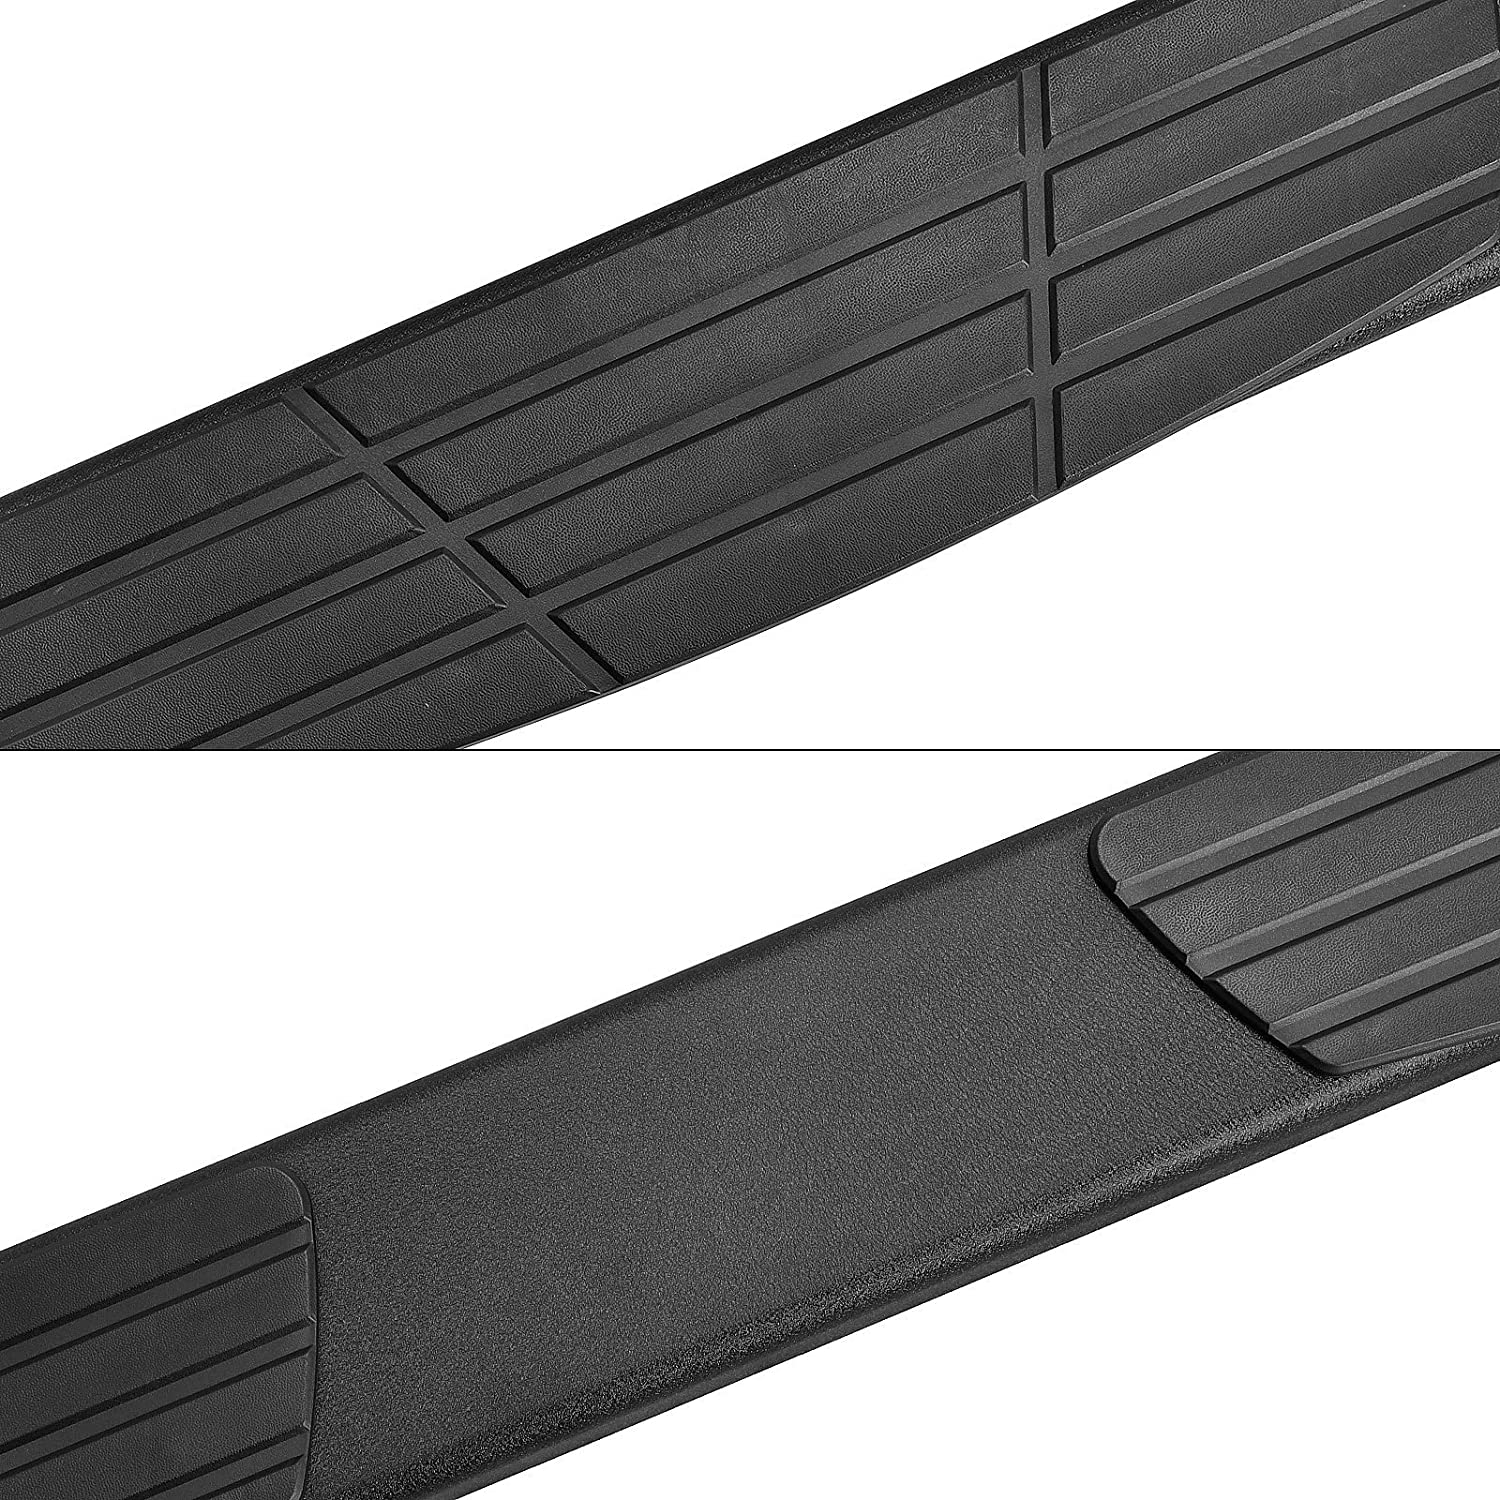 6.5” Running Boards Compatible with 2009-2018 Dodge Ram 1500 Quad Cab(Incl. 19-23 Ram 1500 Classic)& 2010-2024 Ram 2500 3500, Black Side Steps T6 Style. - COMNOVA AUTOPART